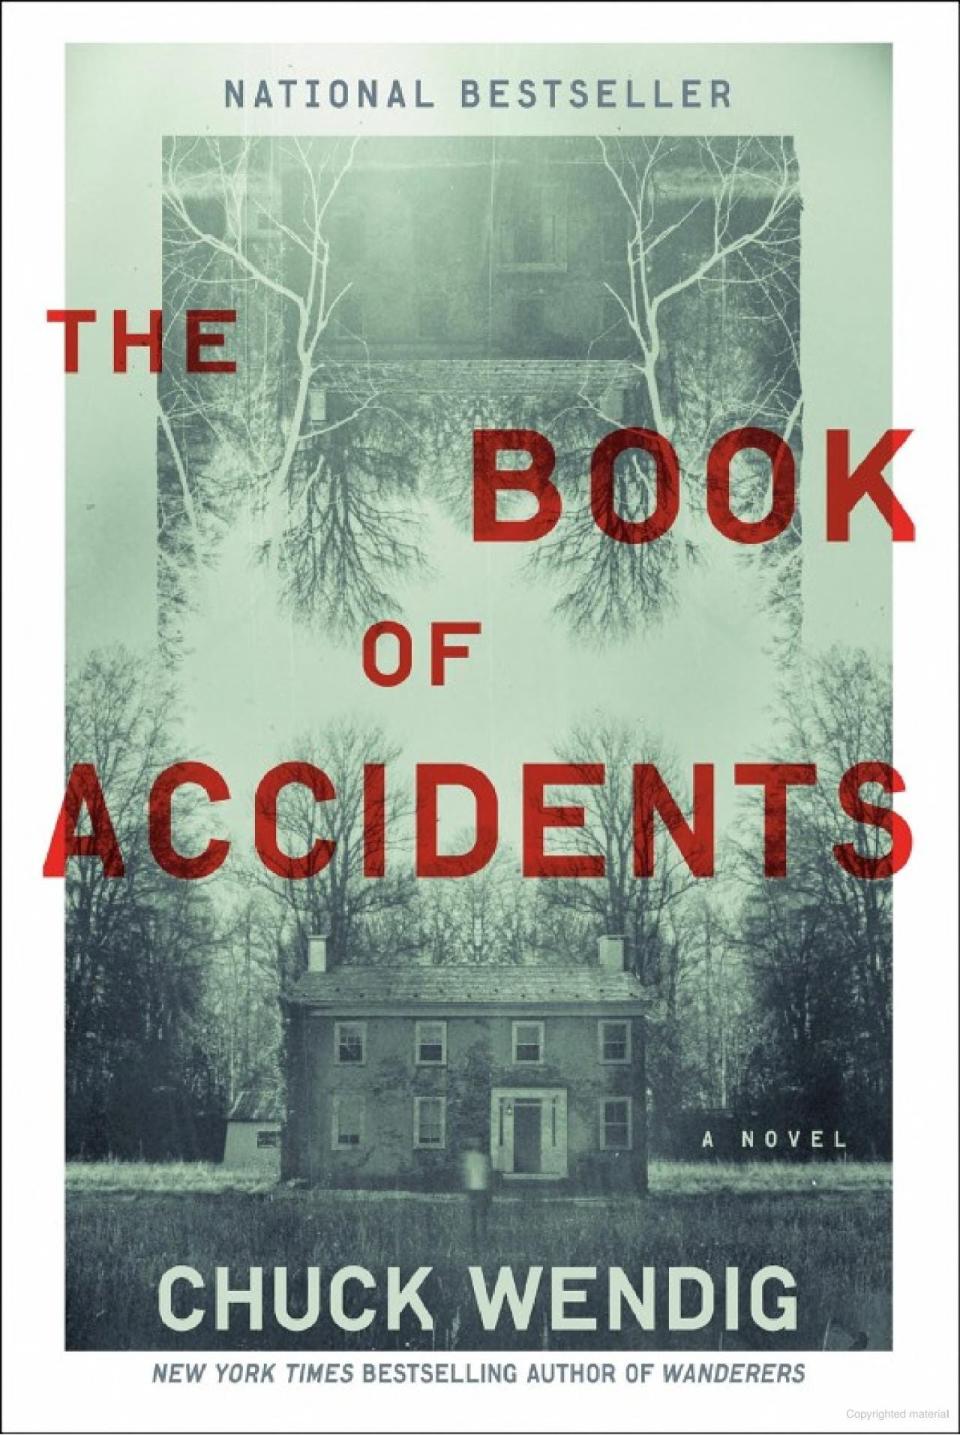 "The Book of Accidents" by Chuck Wendig